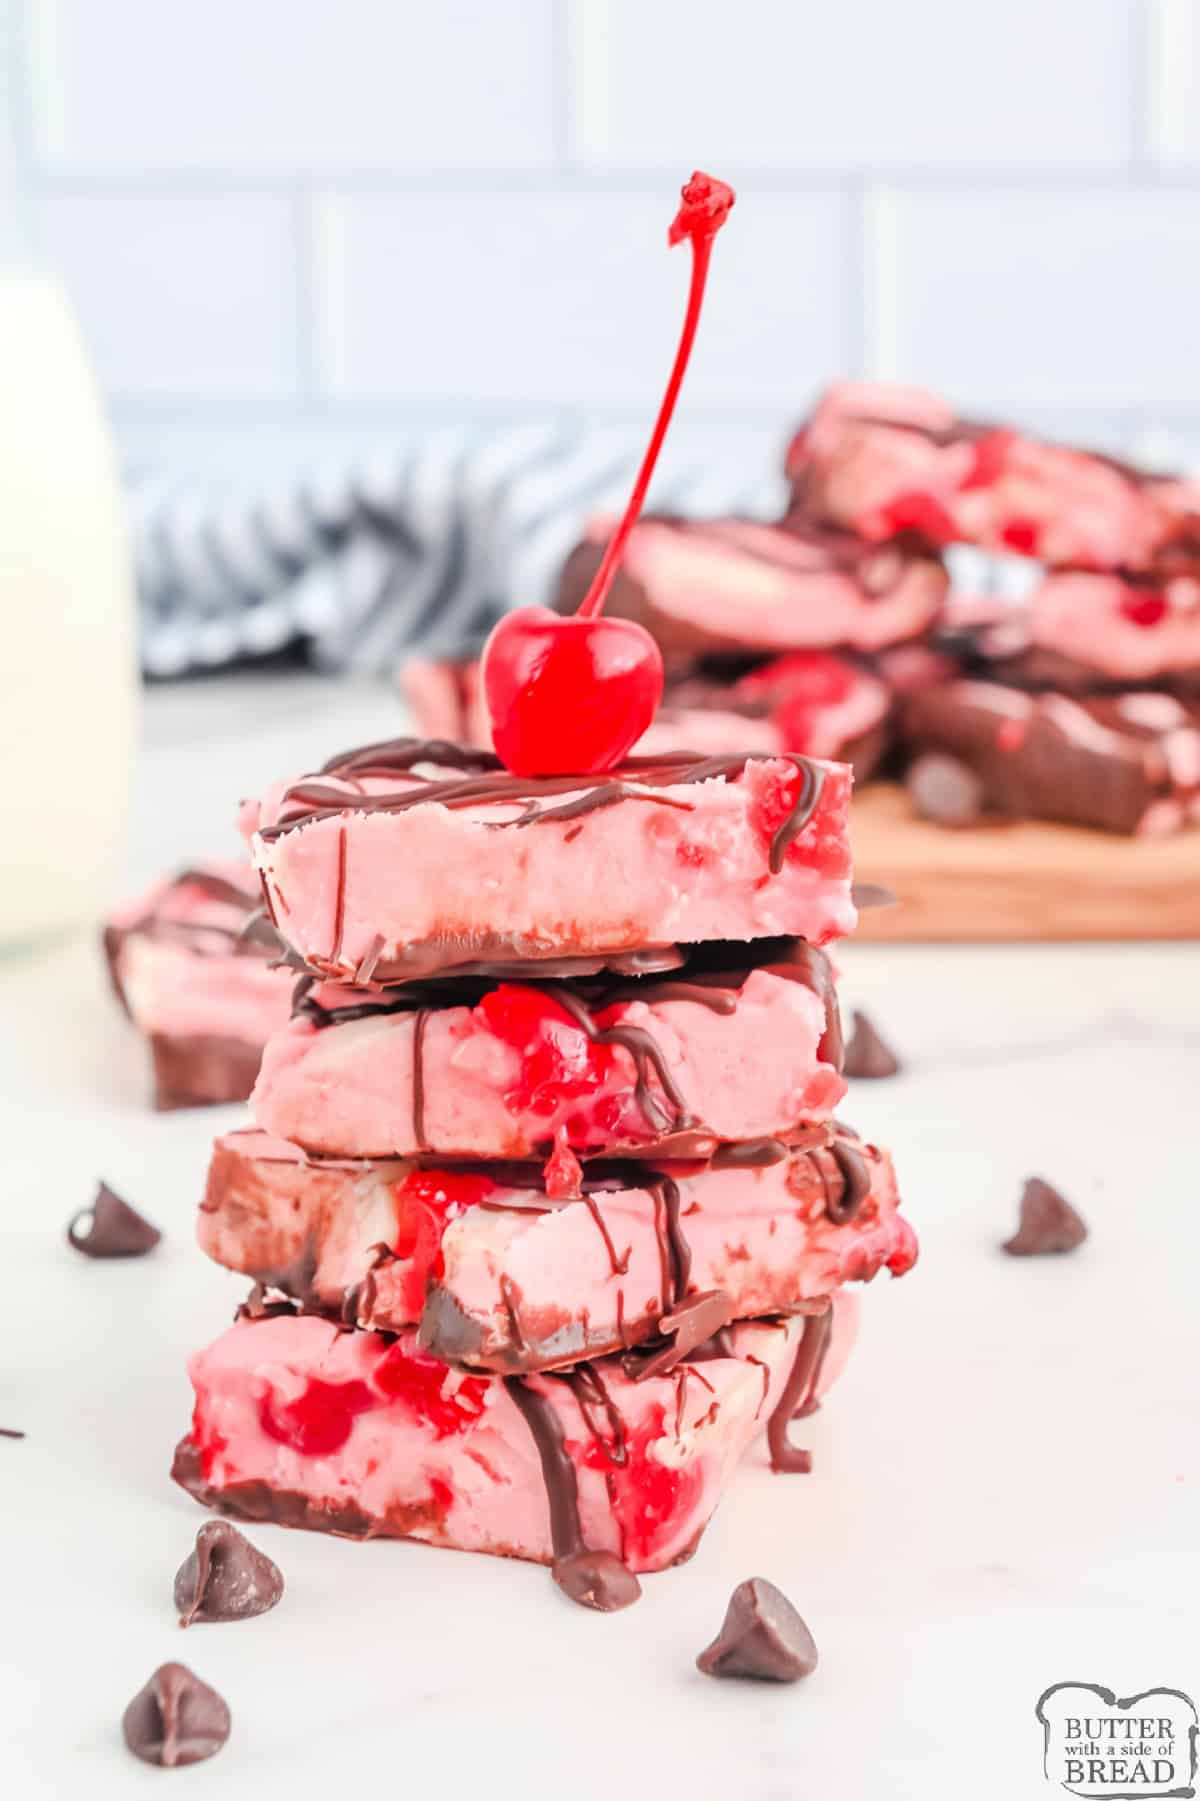 Cherry Garcia Fudge is rich, creamy and packed with cherries and chocolate! Delicious fudge recipe made with maraschino cherries, marshmallow cream, white chocolate chips and semi-sweet chocolate.